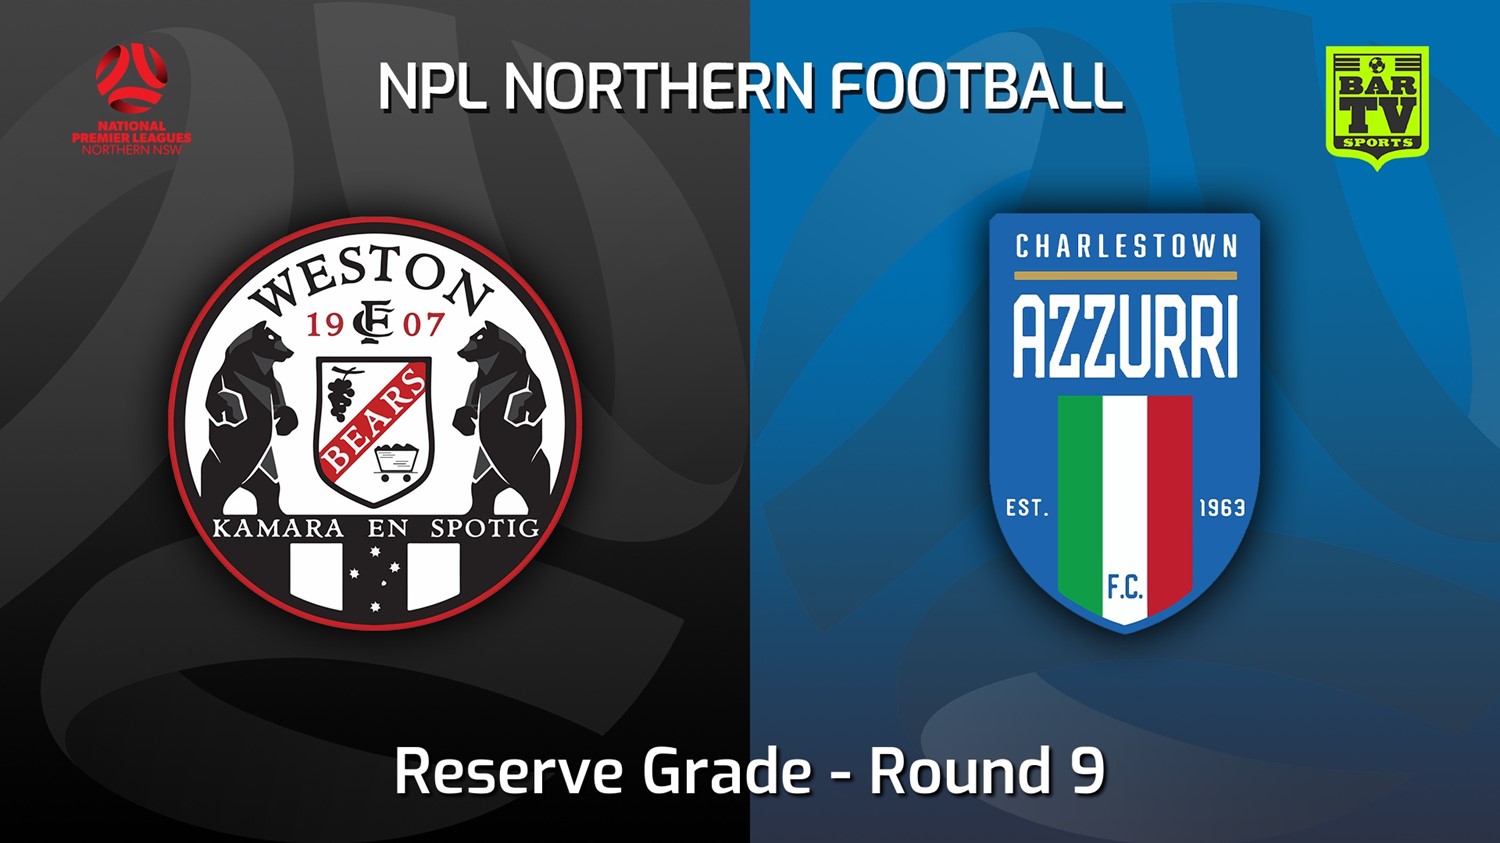 220508-NNSW NPLM Res Round 9 - Weston Workers FC Res v Charlestown Azzurri FC Res Minigame Slate Image